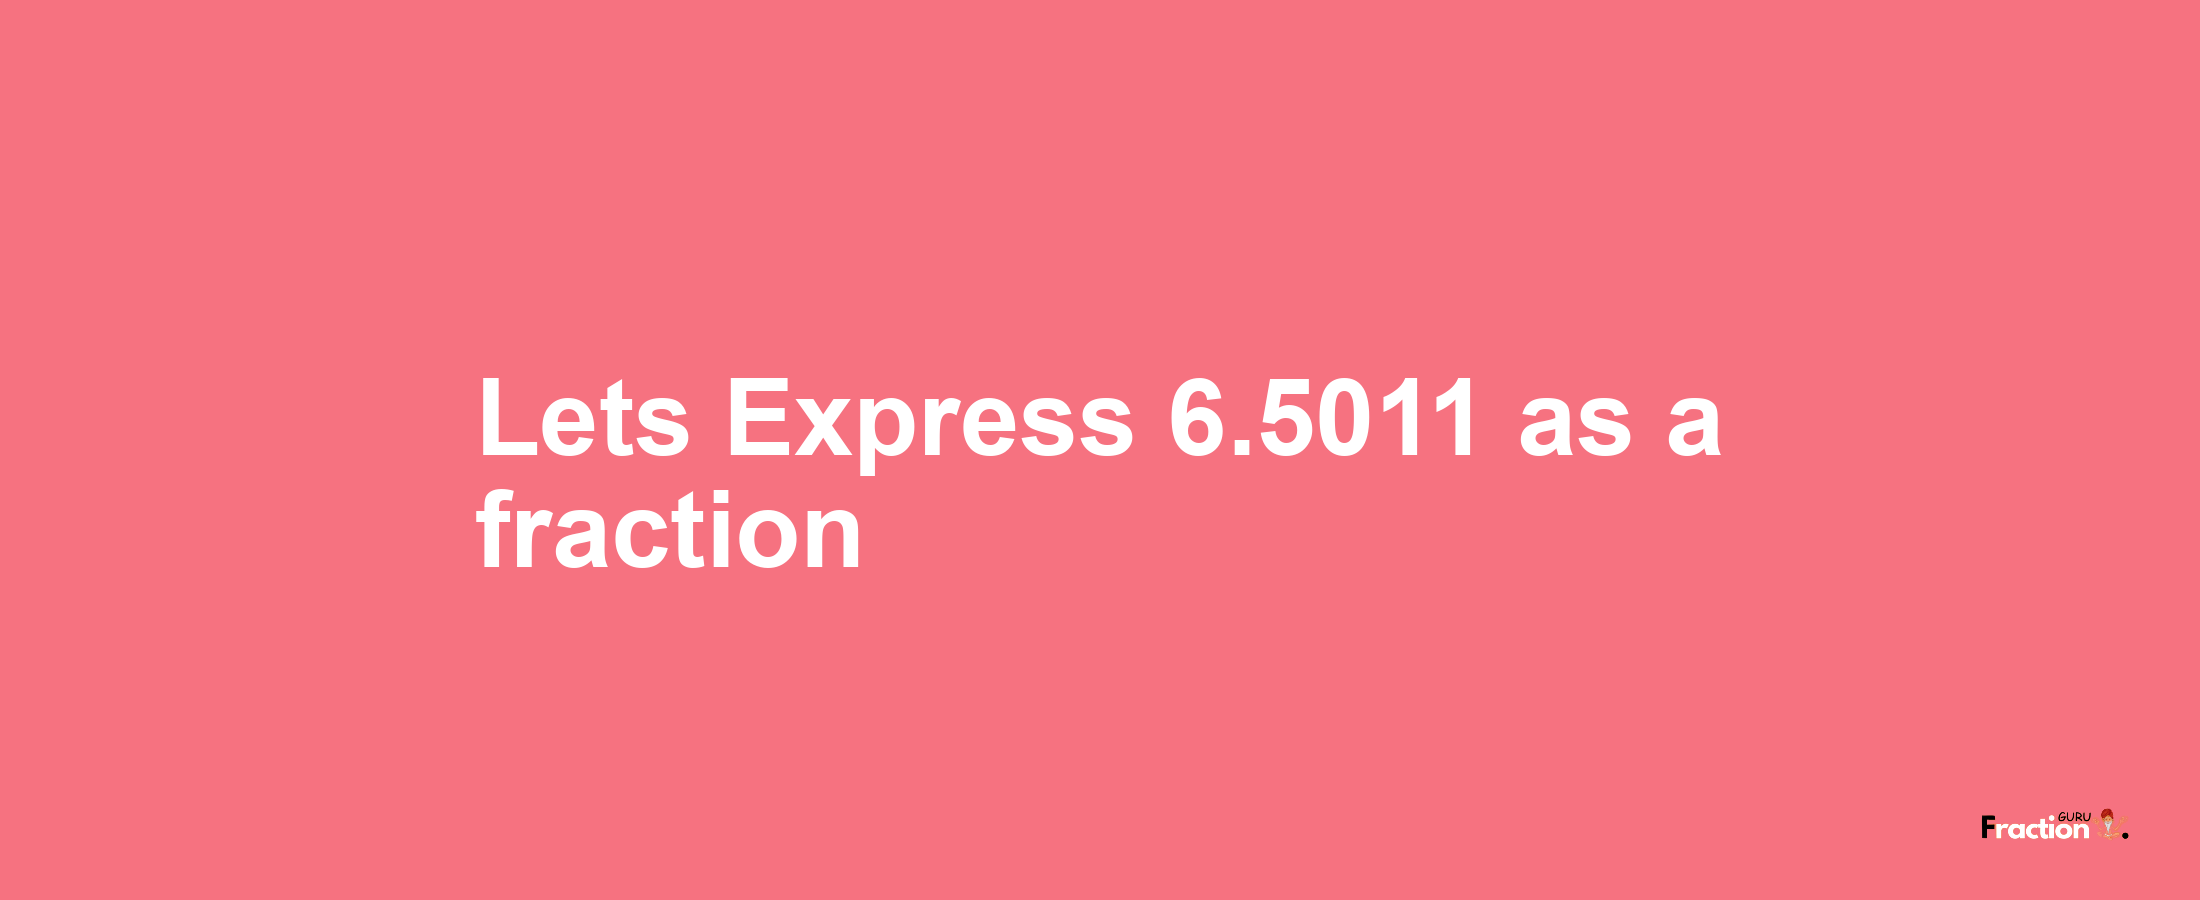 Lets Express 6.5011 as afraction